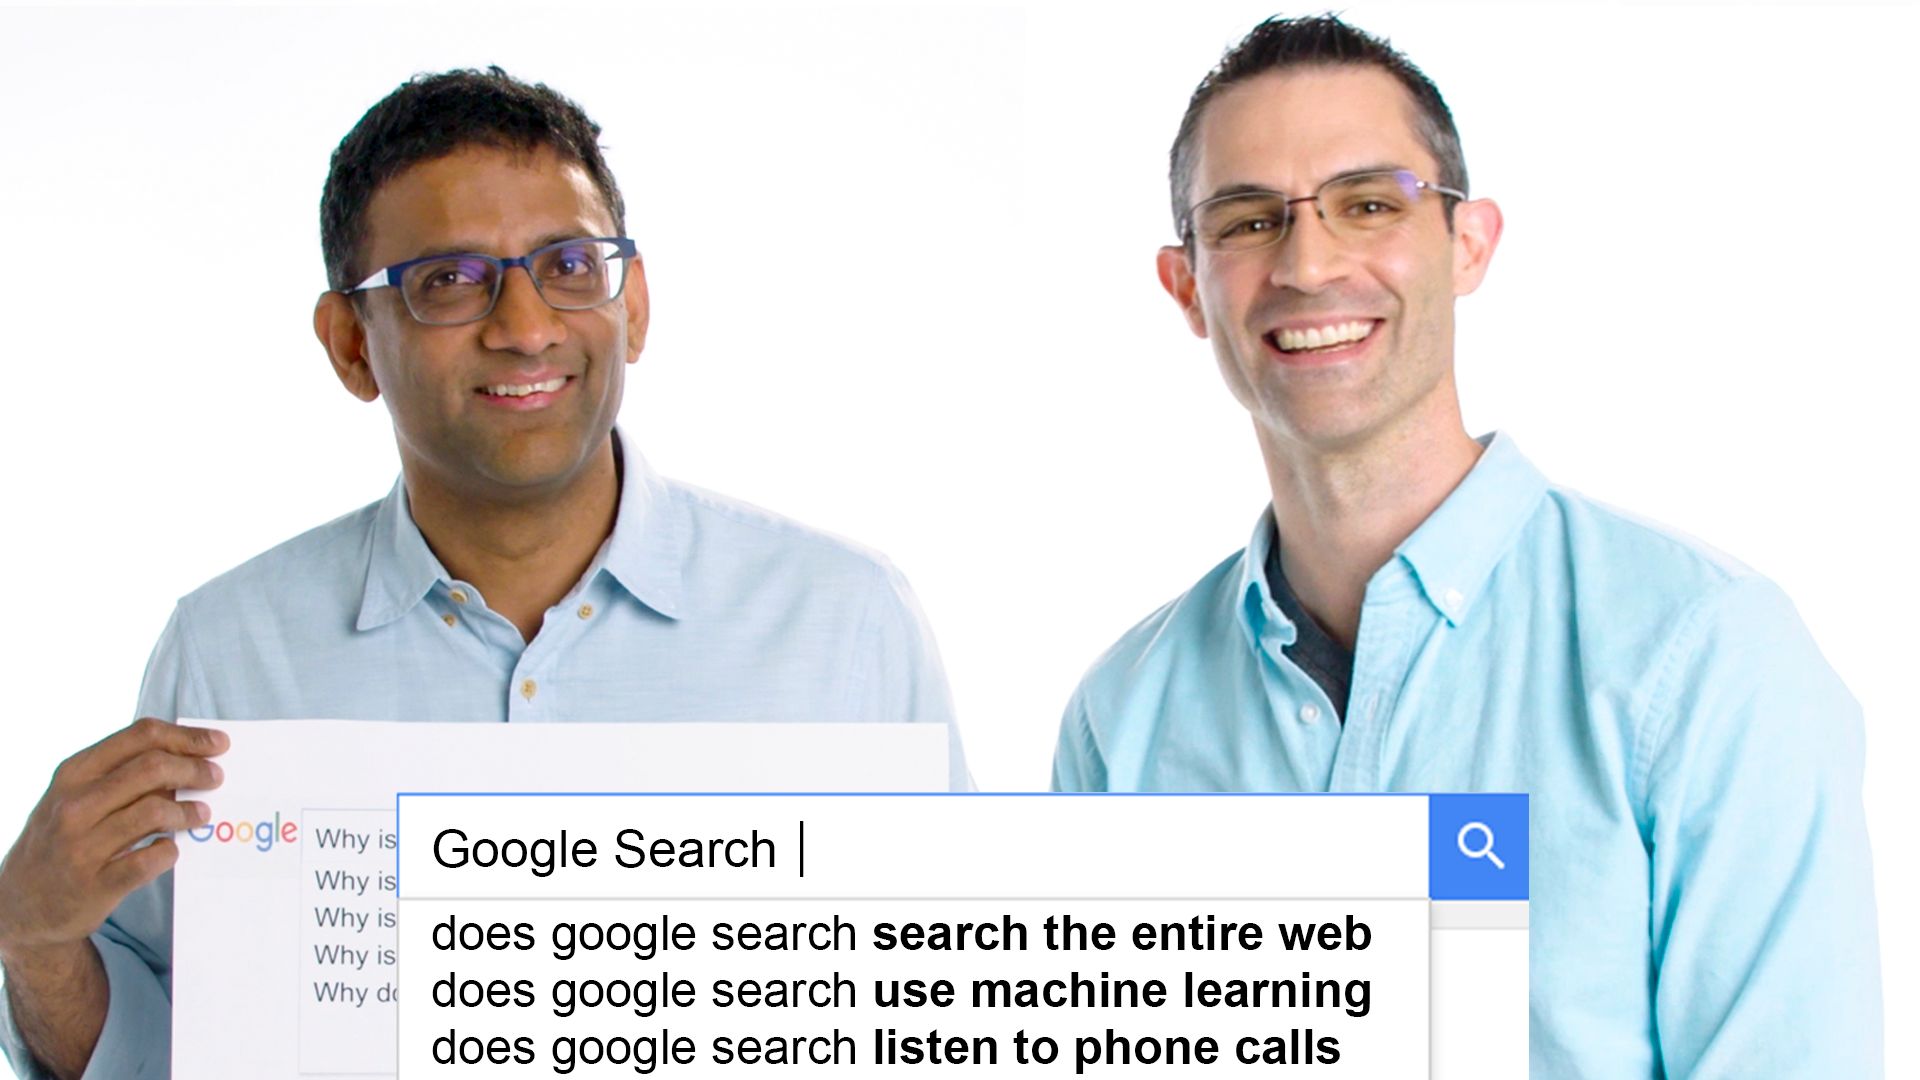 Watch Google Search Team Answers the Web's Most Searched Questions